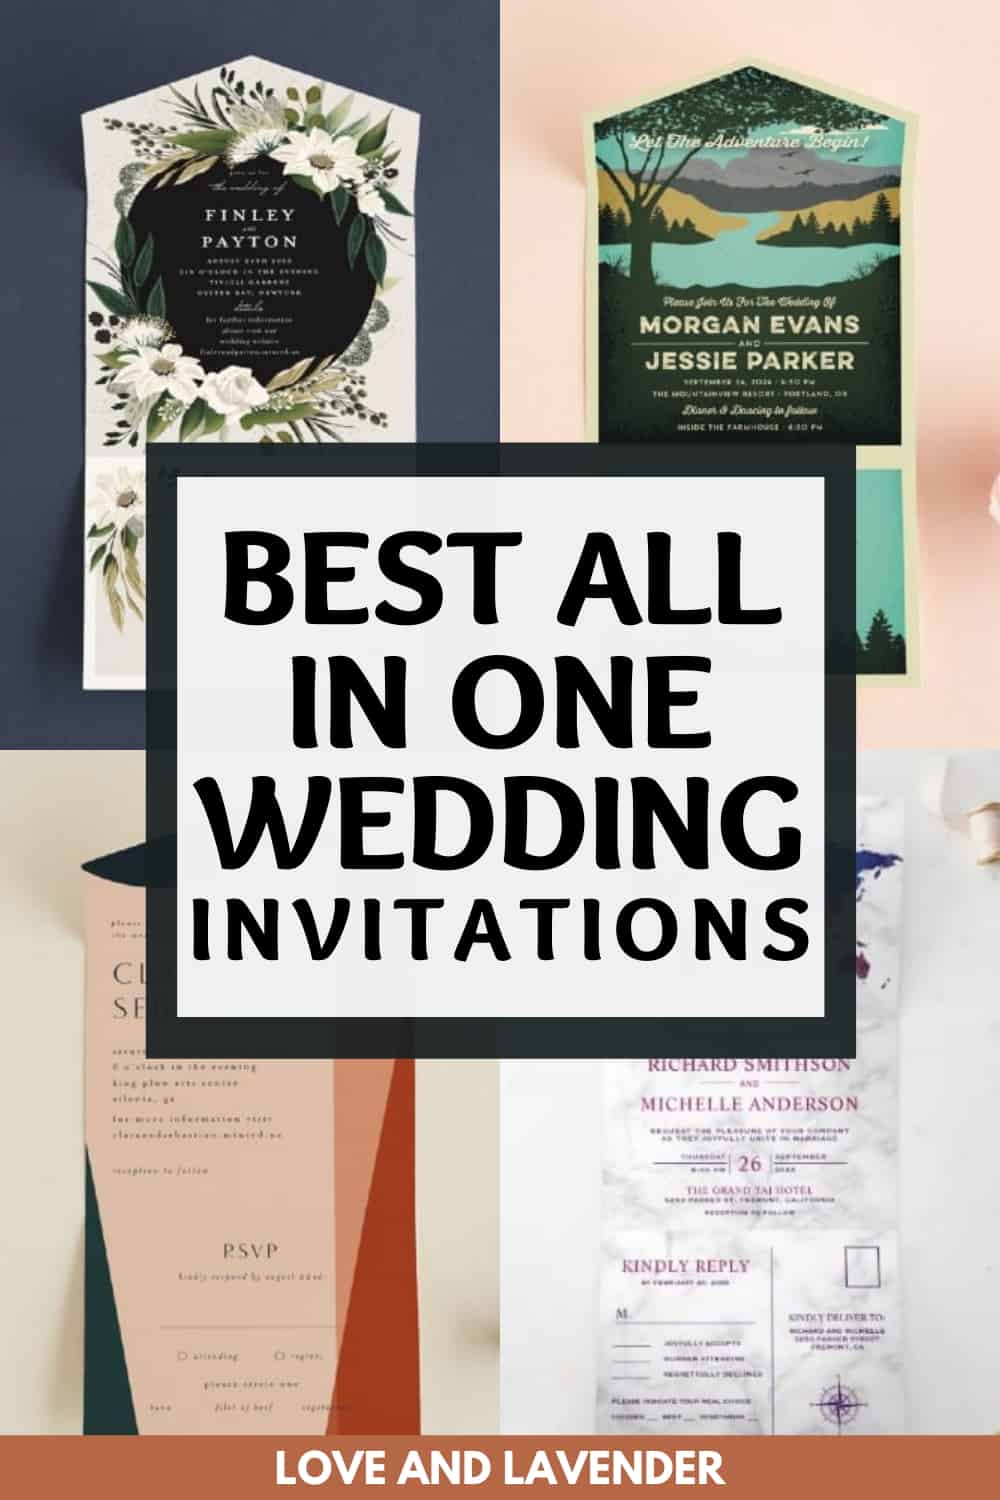 12 All in One Wedding Invitations to Save You Time & Money